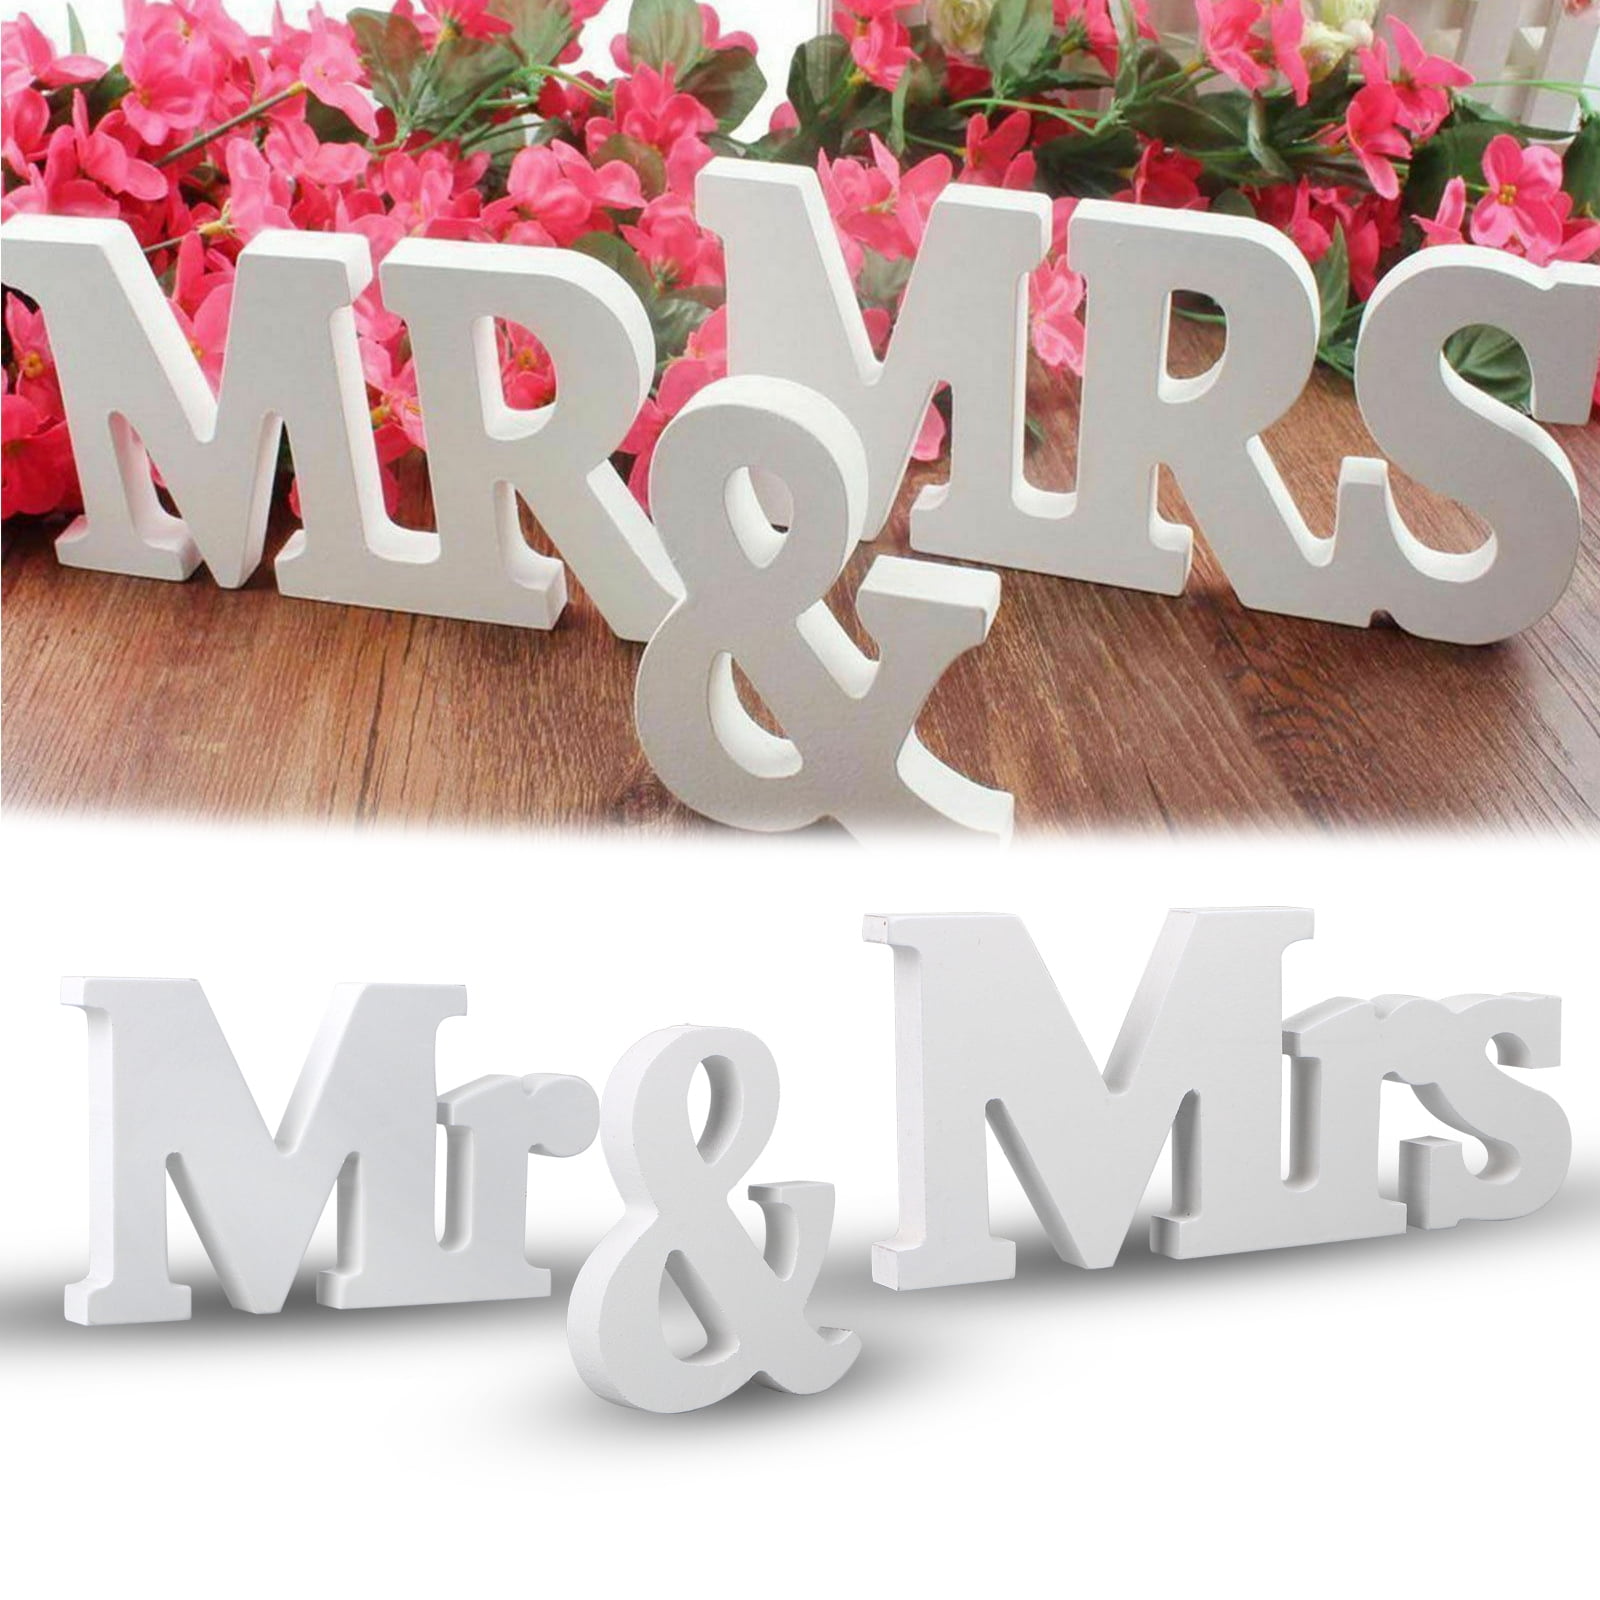 Red Ocean Please Write Your Good Wishes To The Brand New Mr & Mrs Wooden Freestanding Plaque Wedding Sign Table Decoration